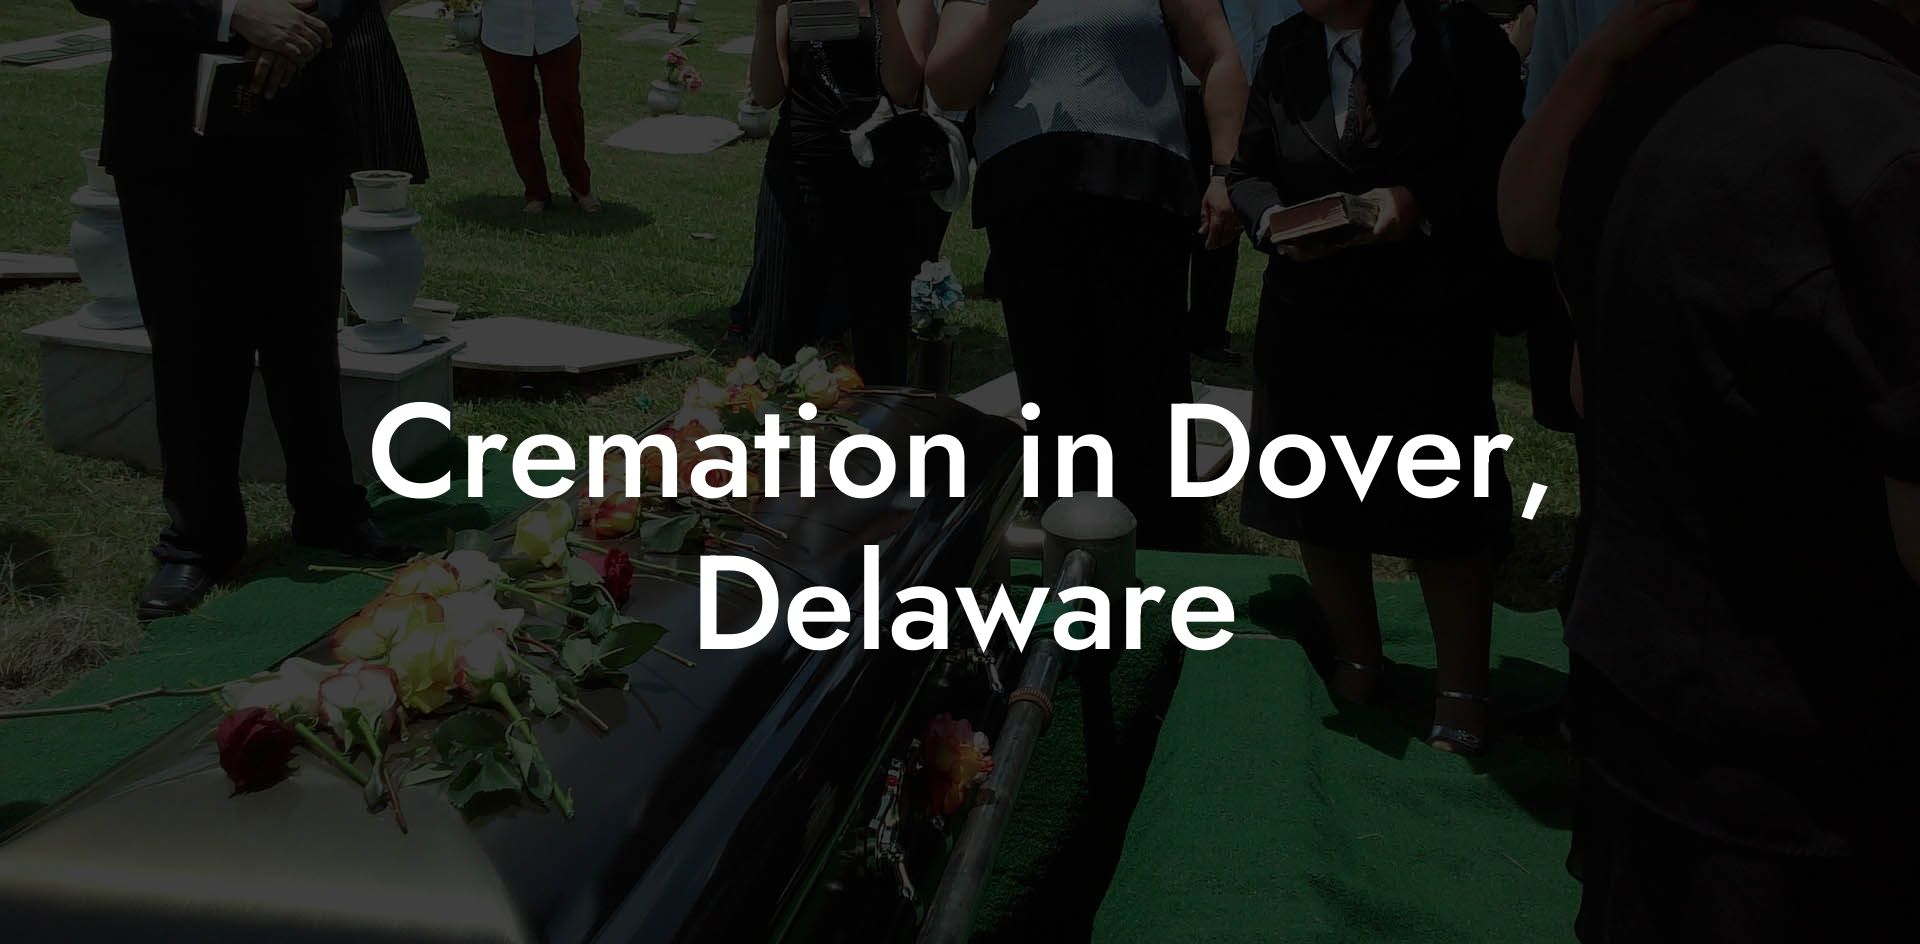 Cremation in Dover, Delaware